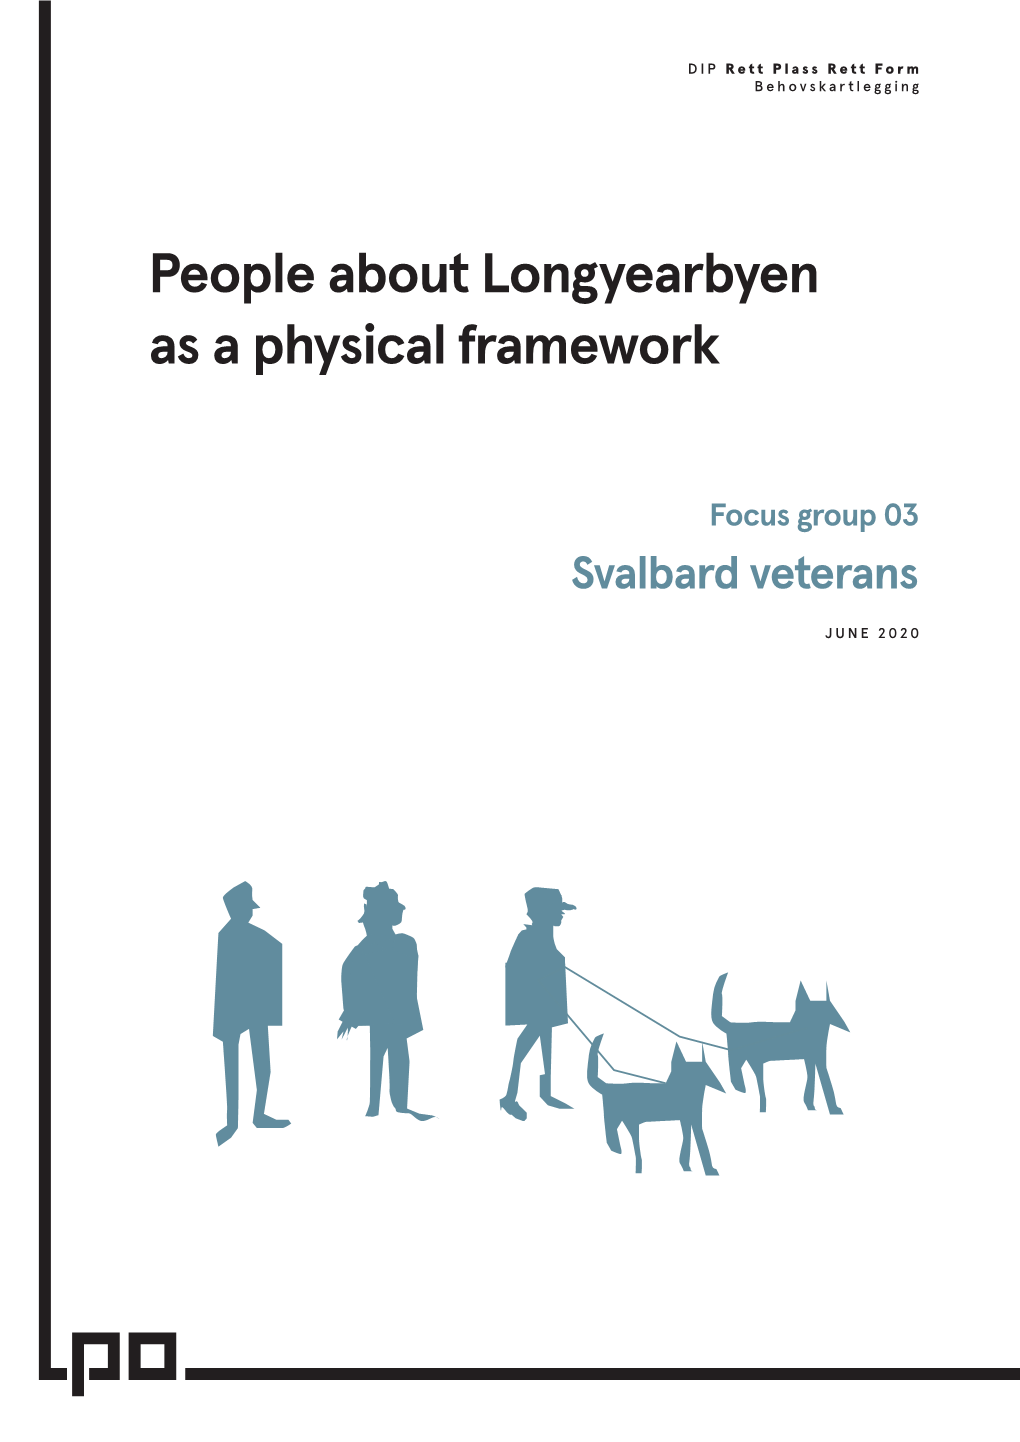 People About Longyearbyen As a Physical Framework